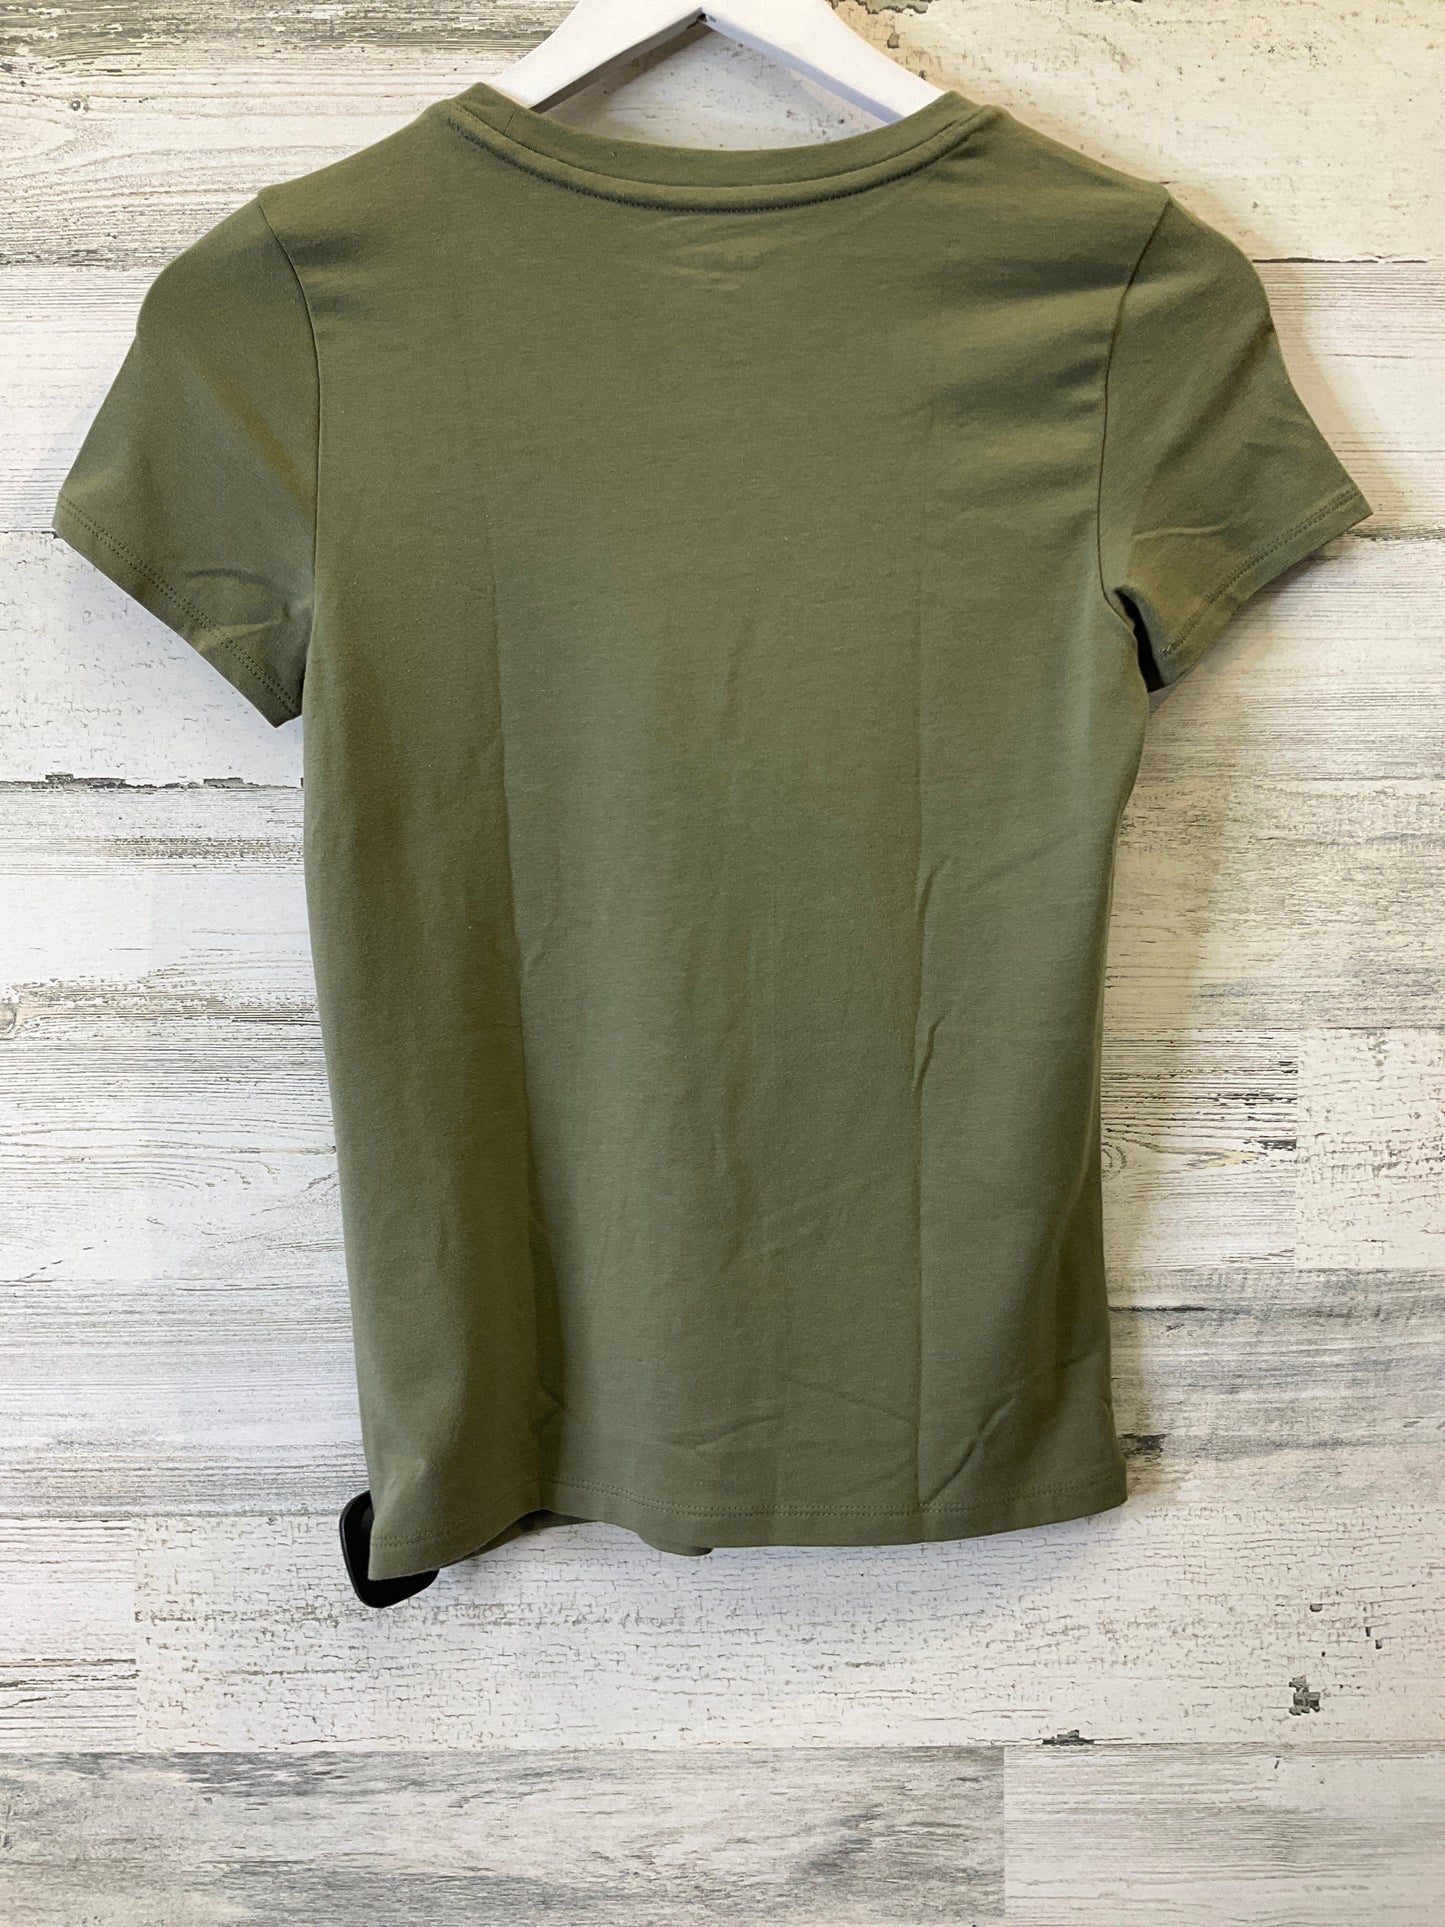 Green Top Short Sleeve Old Navy, Size Xs